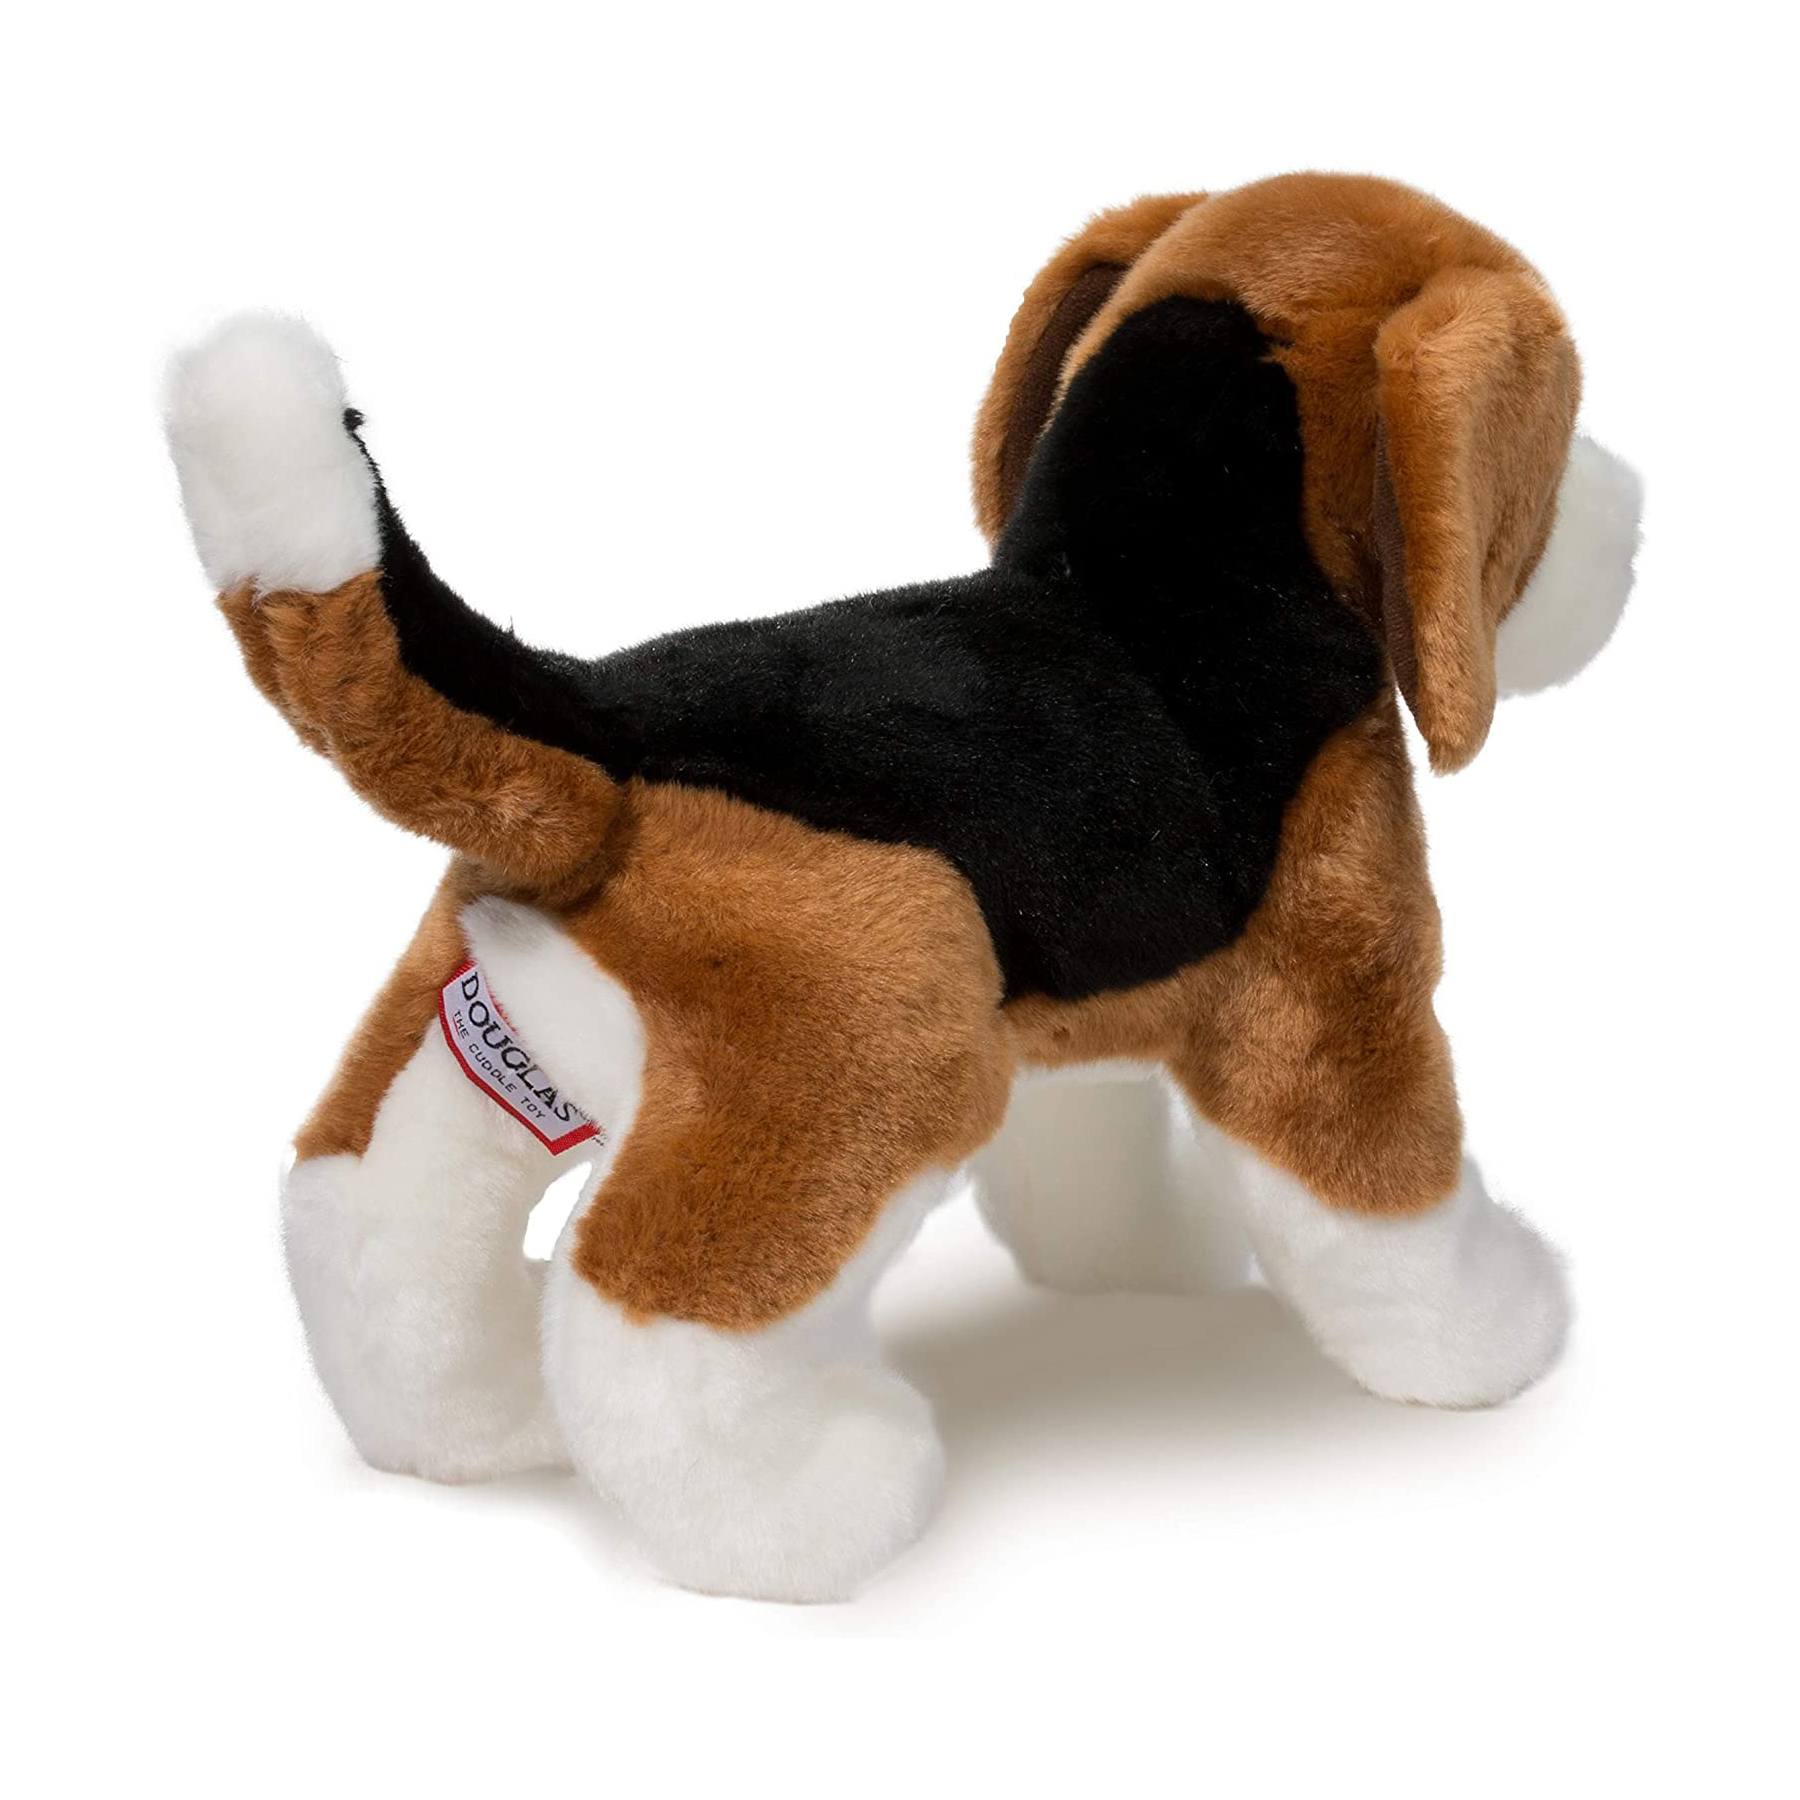 Details about   Duke The Beagle SOFT TOY BATTERSEA Dogs Home 7 INCH PLUSH Licensed Official 